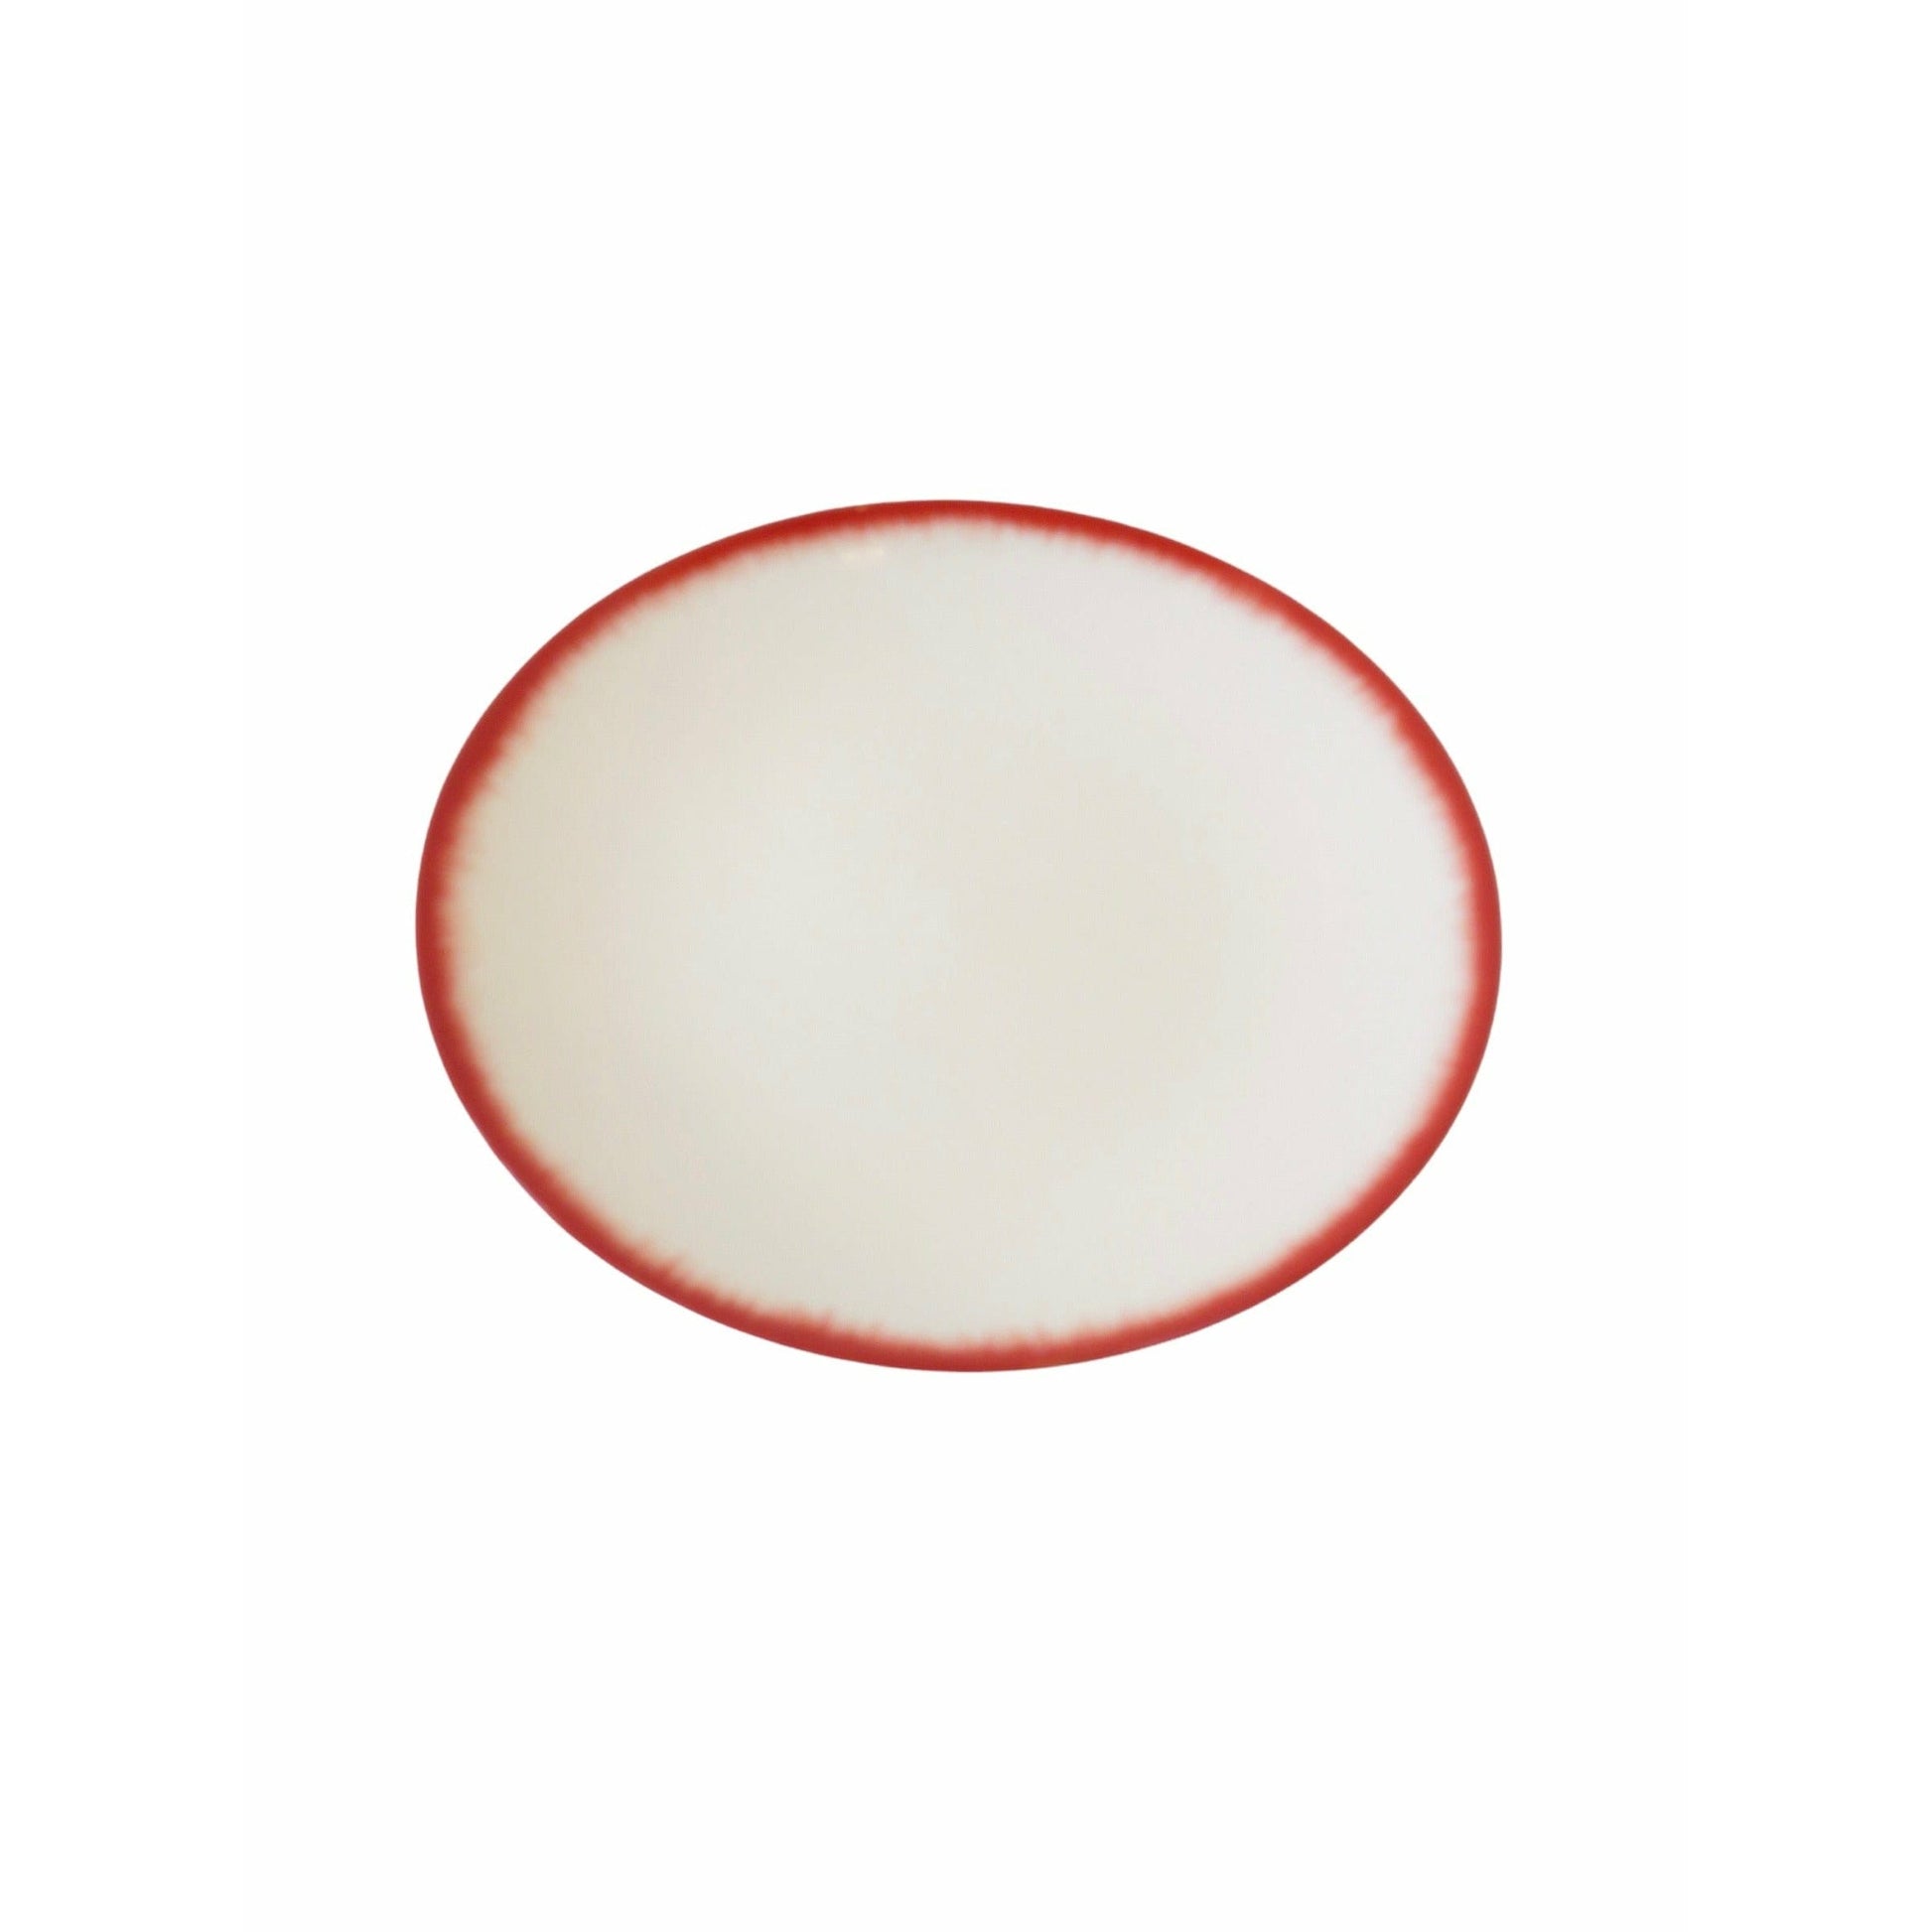 Ann Demeulemeester Home Plate 17.5 centimeters / Off-white & red / Porcelain Ann Demeulemeester for Serax 17.5 cm plates (set of two)